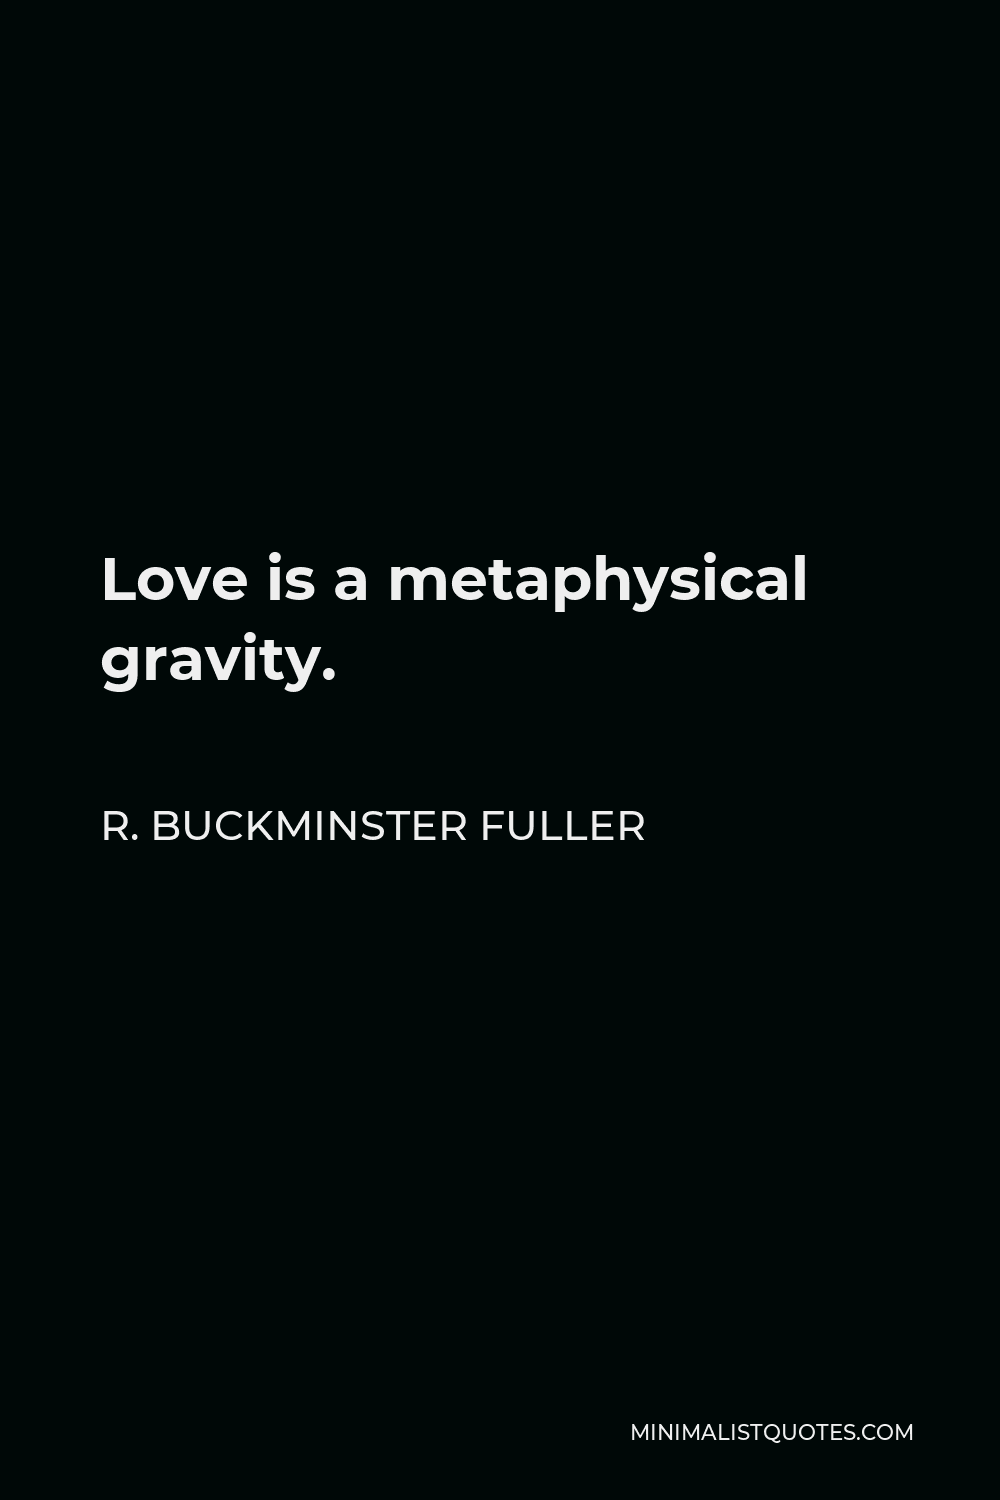 R. Buckminster Fuller Quote: Love is a metaphysical gravity.